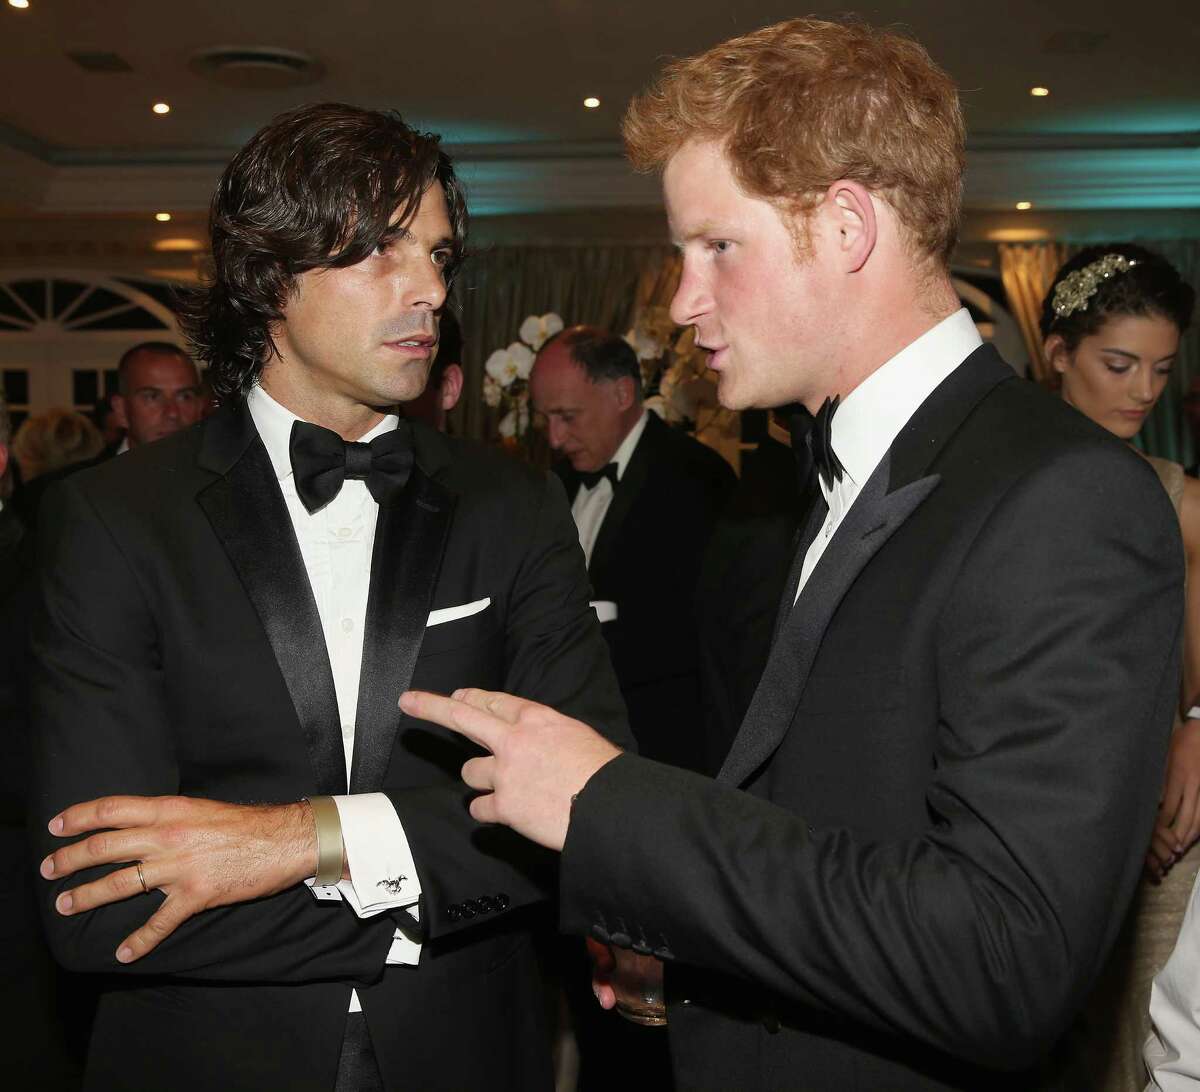 Nacho Figueras chats with Prince Harry as he attends the Sentebale Gala Dinner at Summer Place on Feb. 27, 2013, in Johannesburg, South Africa. Sentebale is a charity founded by Prince Harry and Prince Seeiso of Lesotho. It helps the most vulnerable children in Lesotho get the support they need to lead healthy and productive lives. Prince Harry and Figueras will be opponents during a May 15 polo match in Greenwich to raise money for the Sentebale charity. (Photo by Chris Jackson/Getty Images)